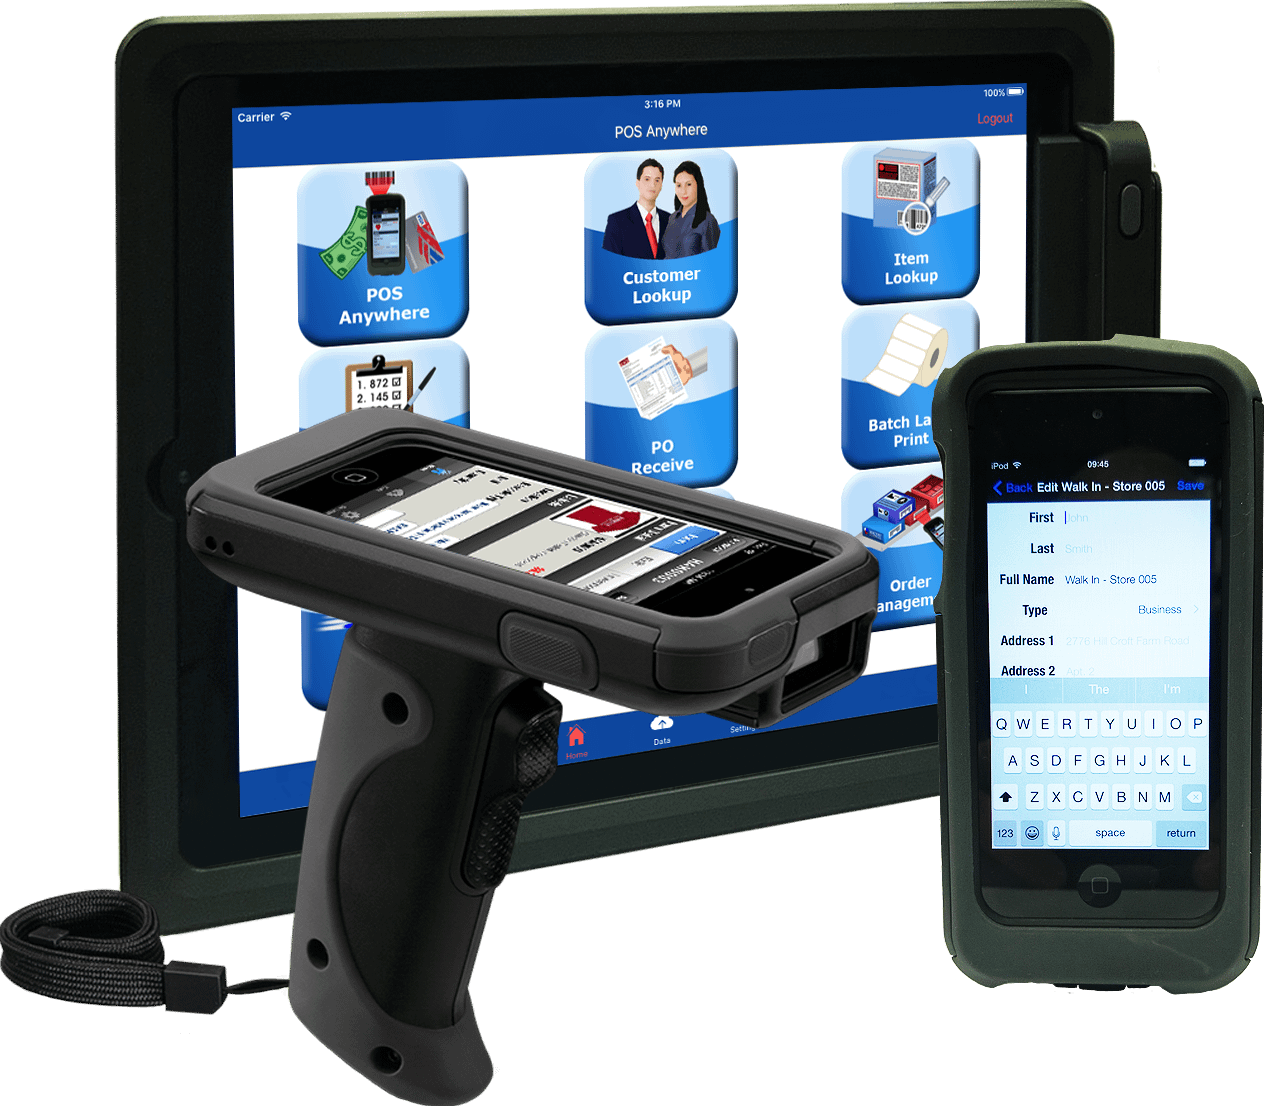 3 different devices for mobile POS - POS anywhere